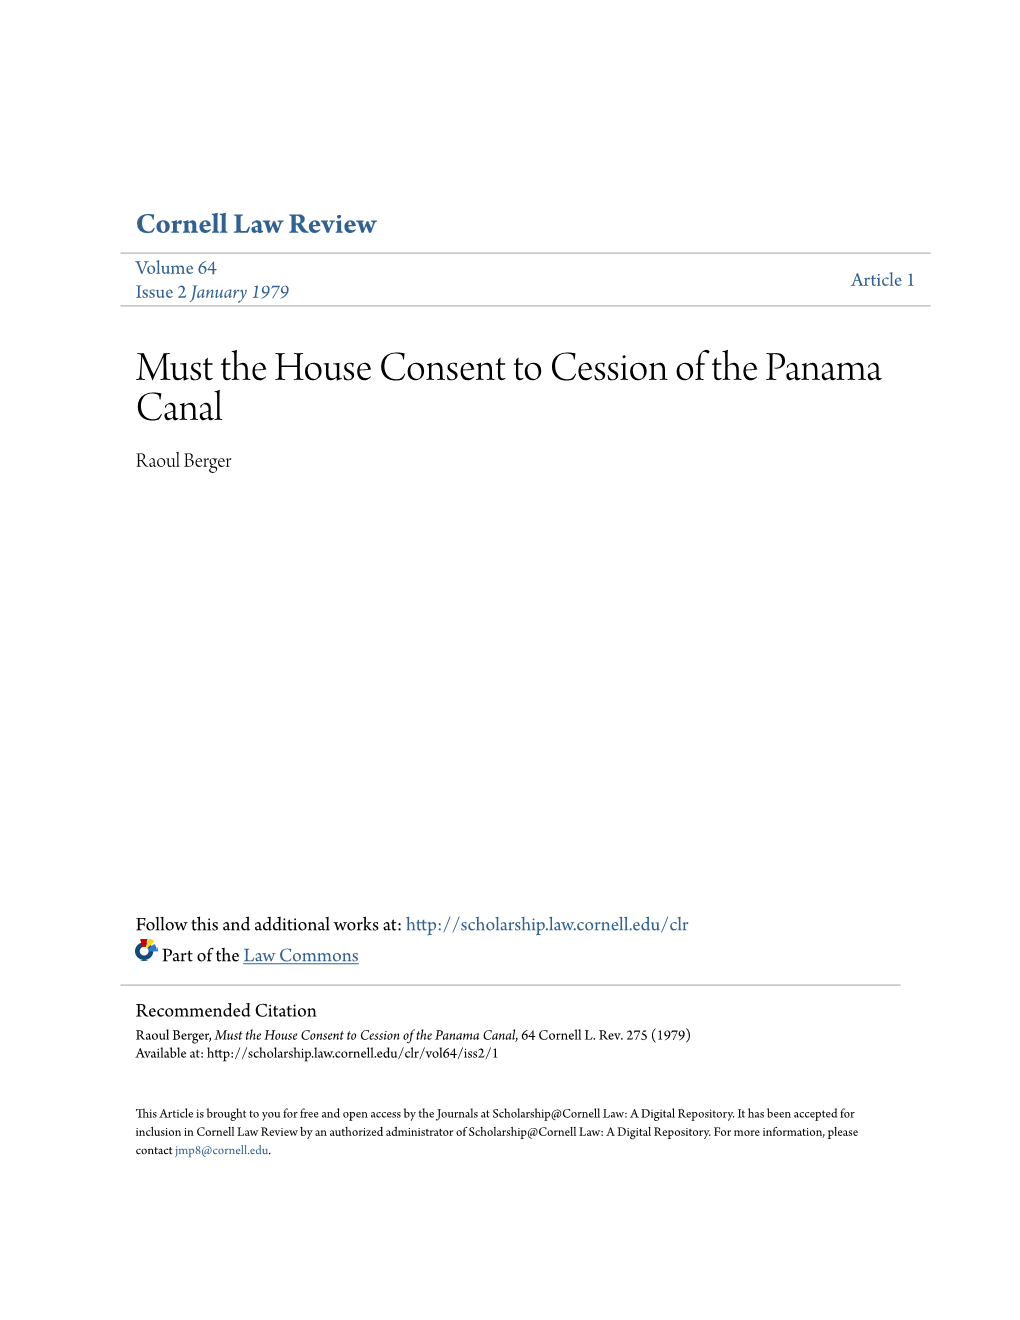 Must the House Consent to Cession of the Panama Canal Raoul Berger